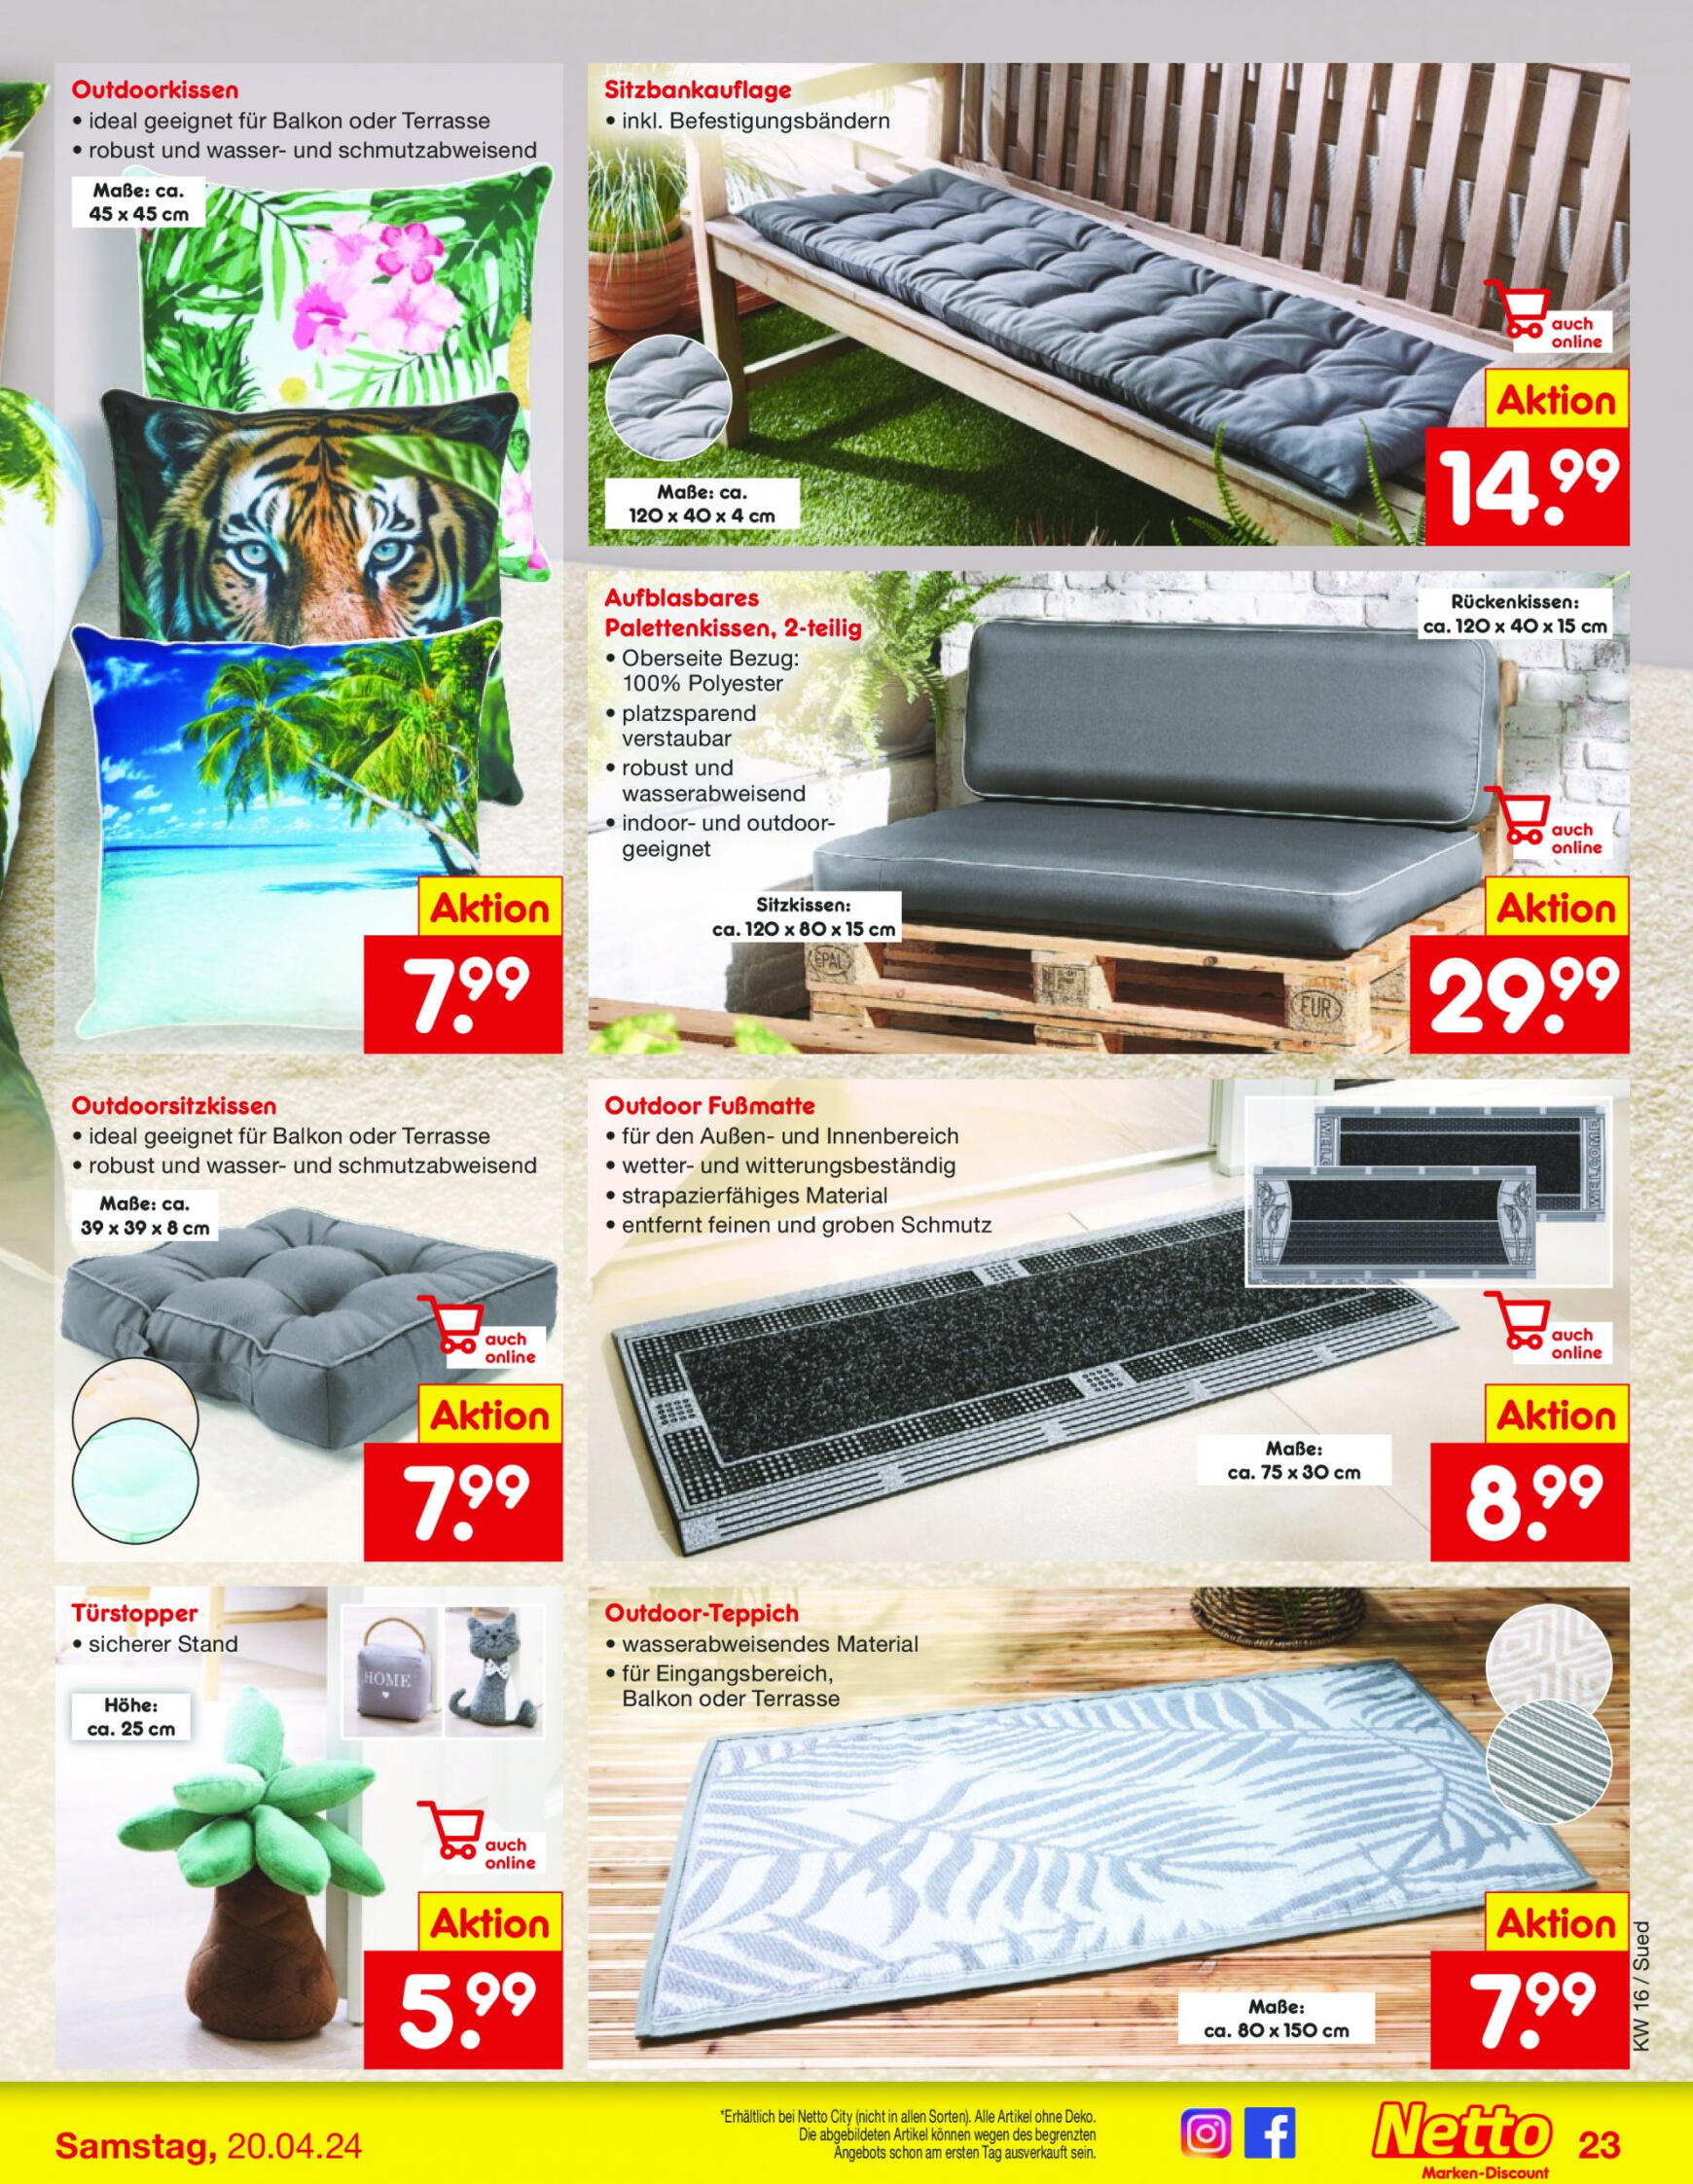 netto - Flyer Netto aktuell 15.04. - 20.04. - page: 29